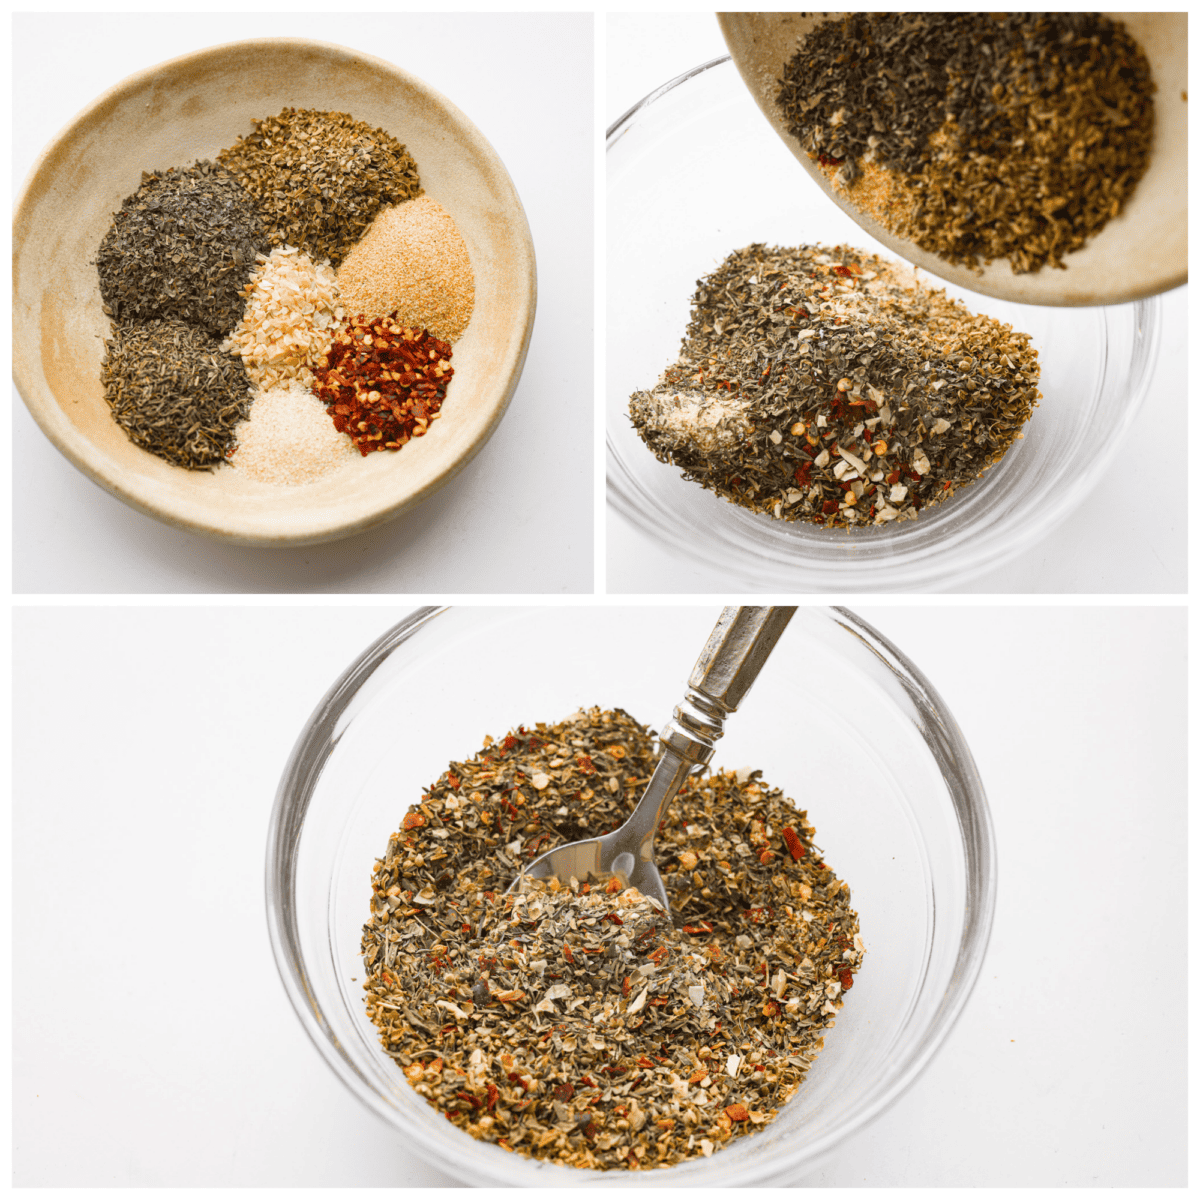 Collage of herbs and spices being mixed together.